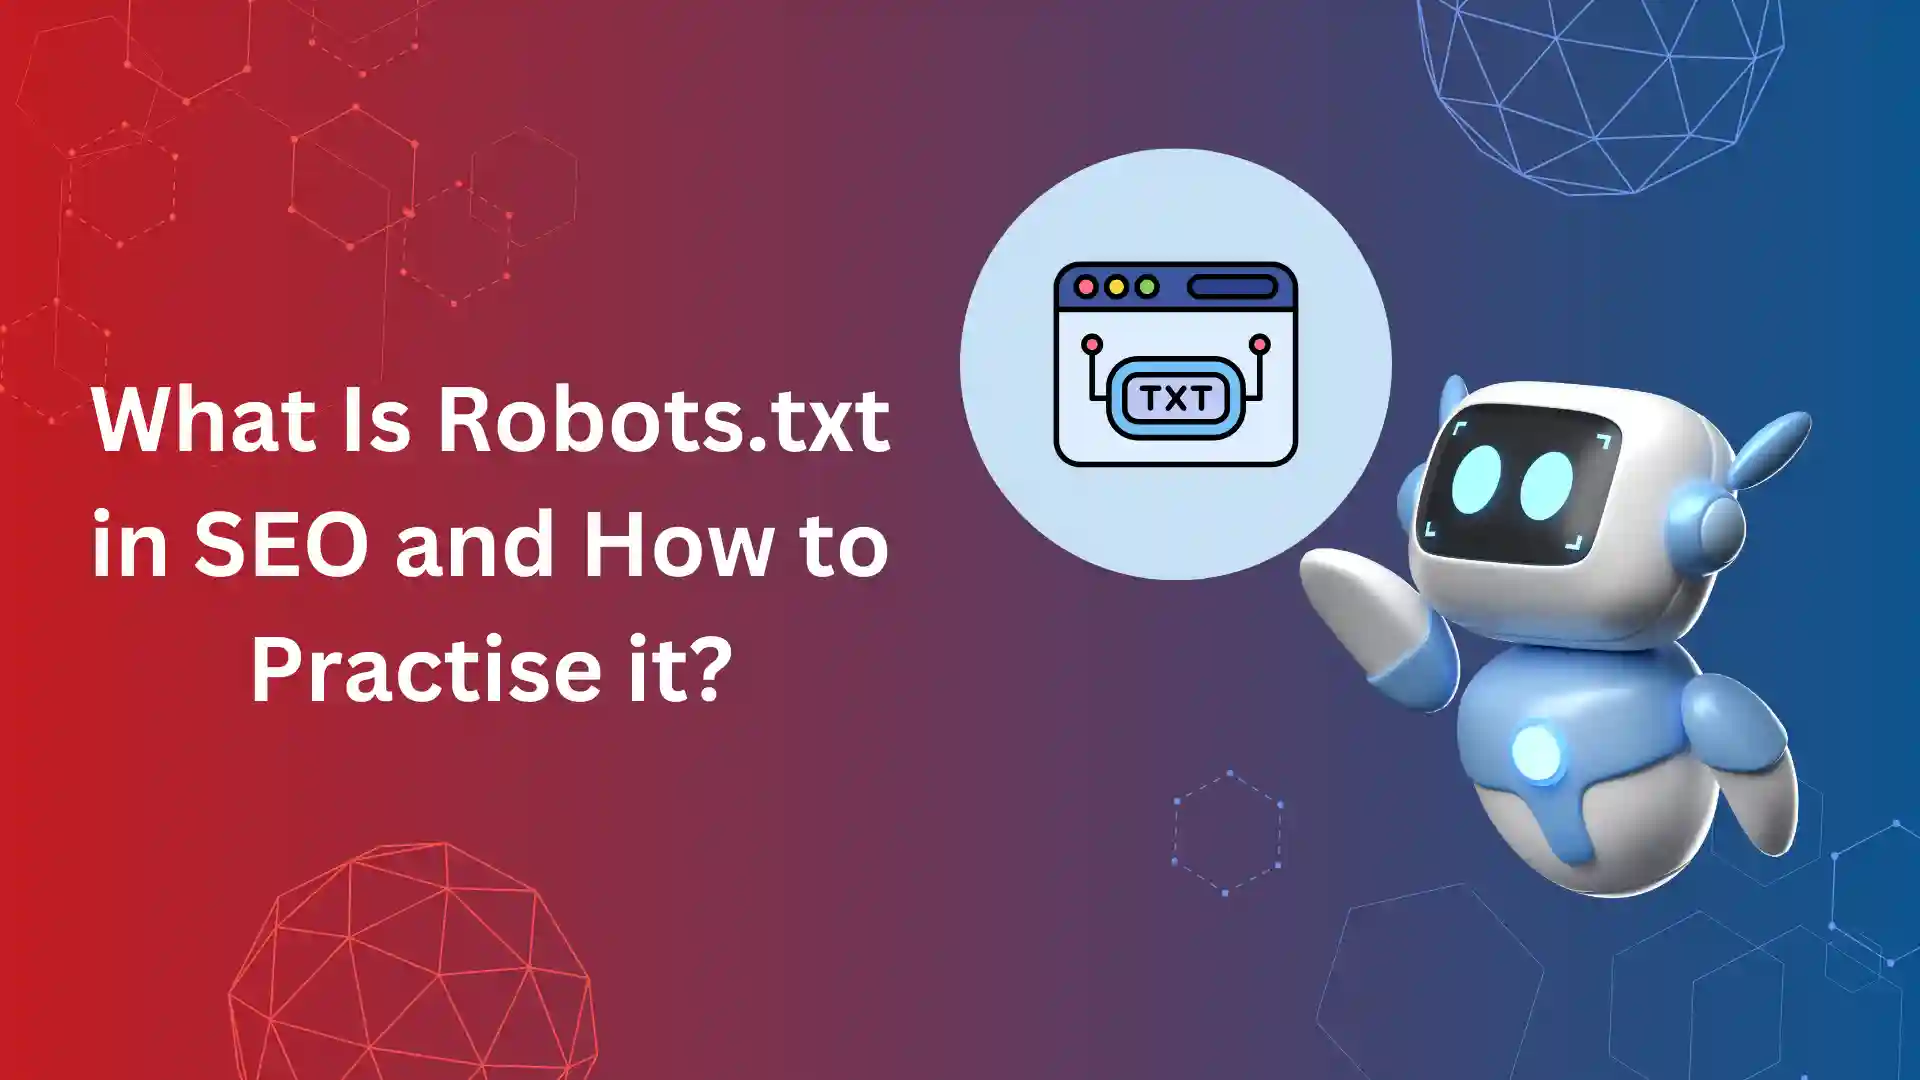 What Is Robots.txt in SEO and How to Practise it?